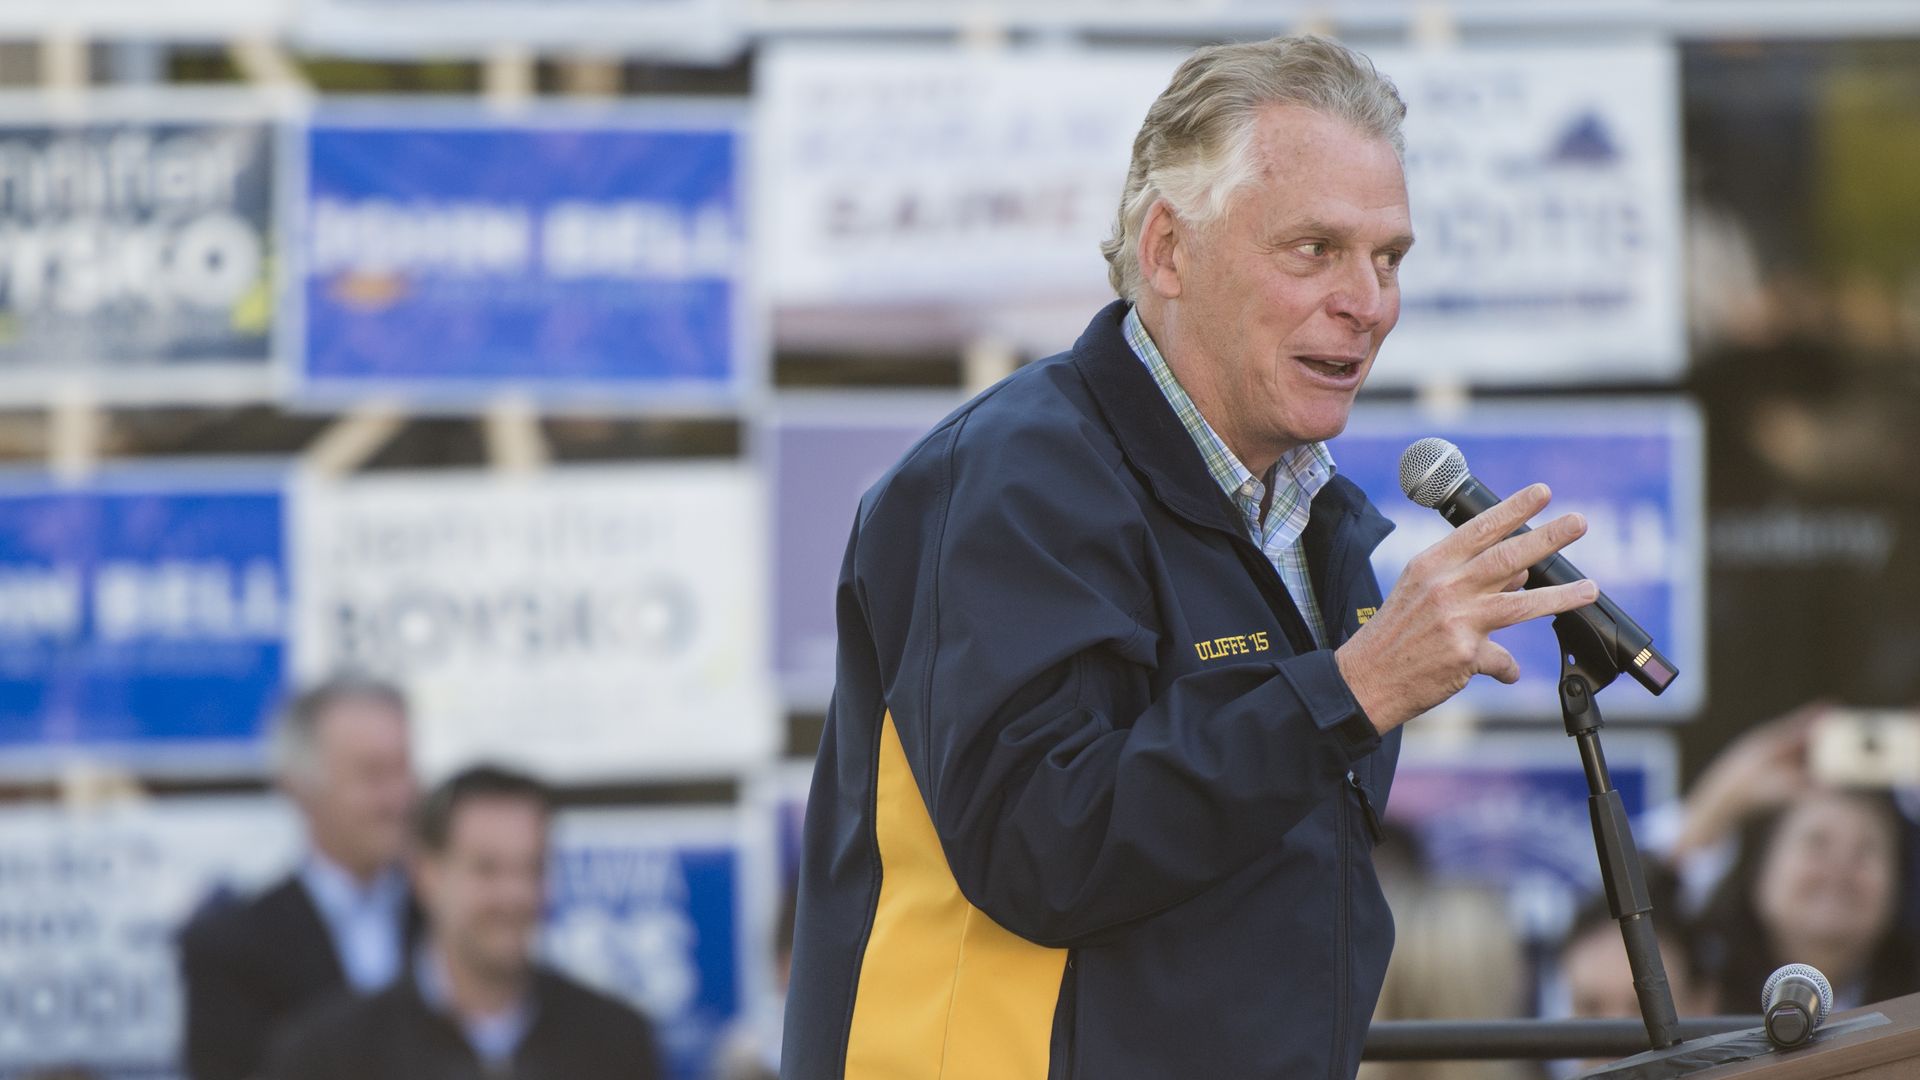 Terry McAuliffe is seen on a stage.